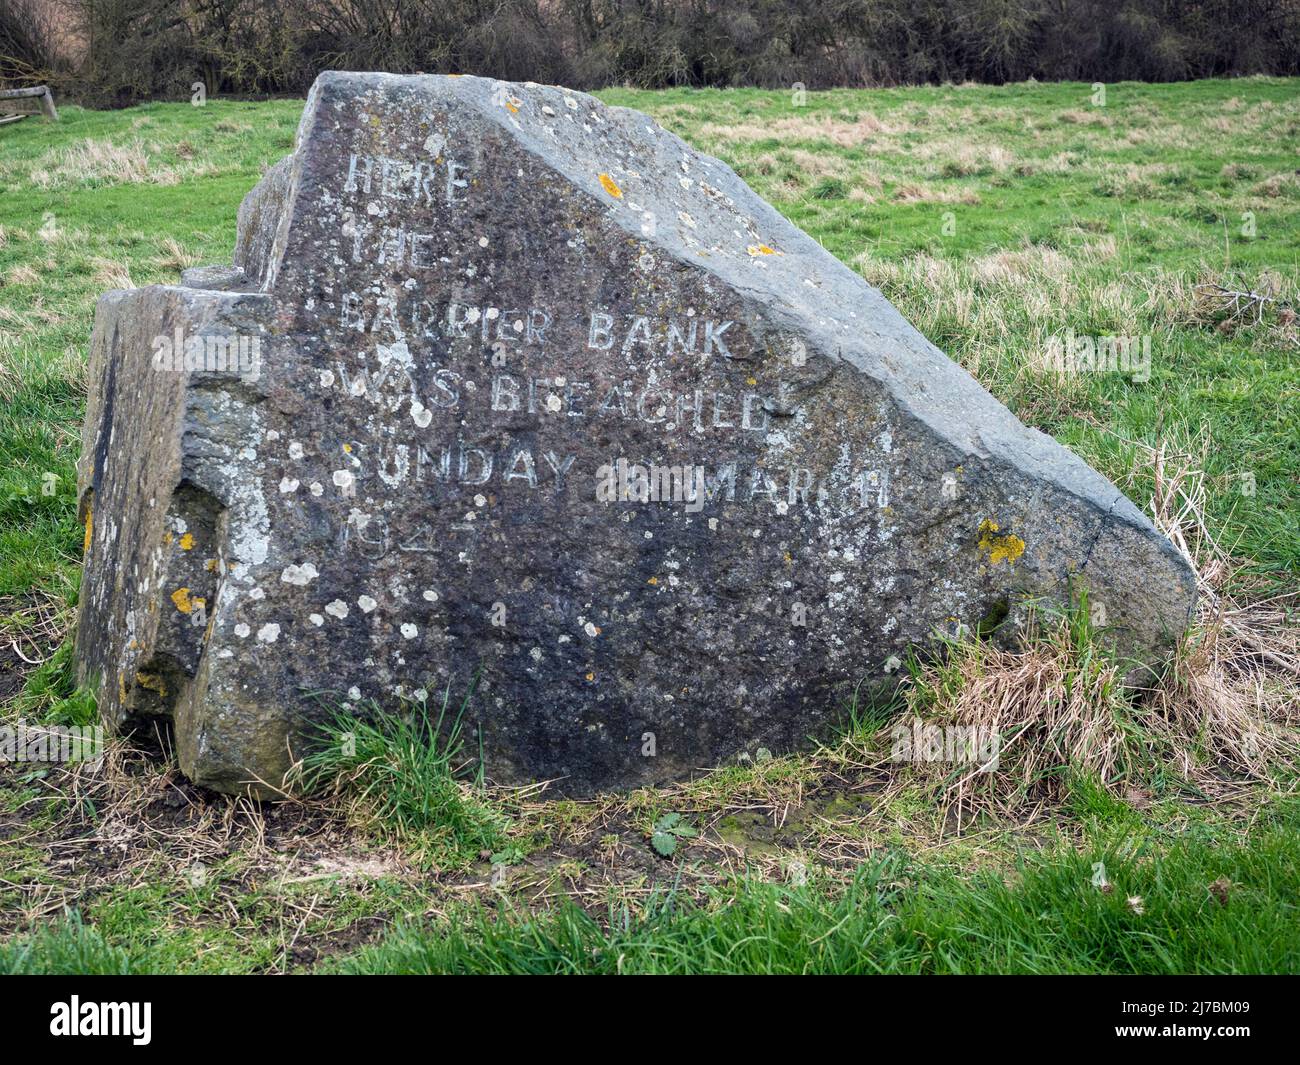 Stone to mark where the breach occurred of the barrier bank along the River Great Ouse on Sunday, 16th March 1947, near Earith, Cambridgeshire Stock Photo